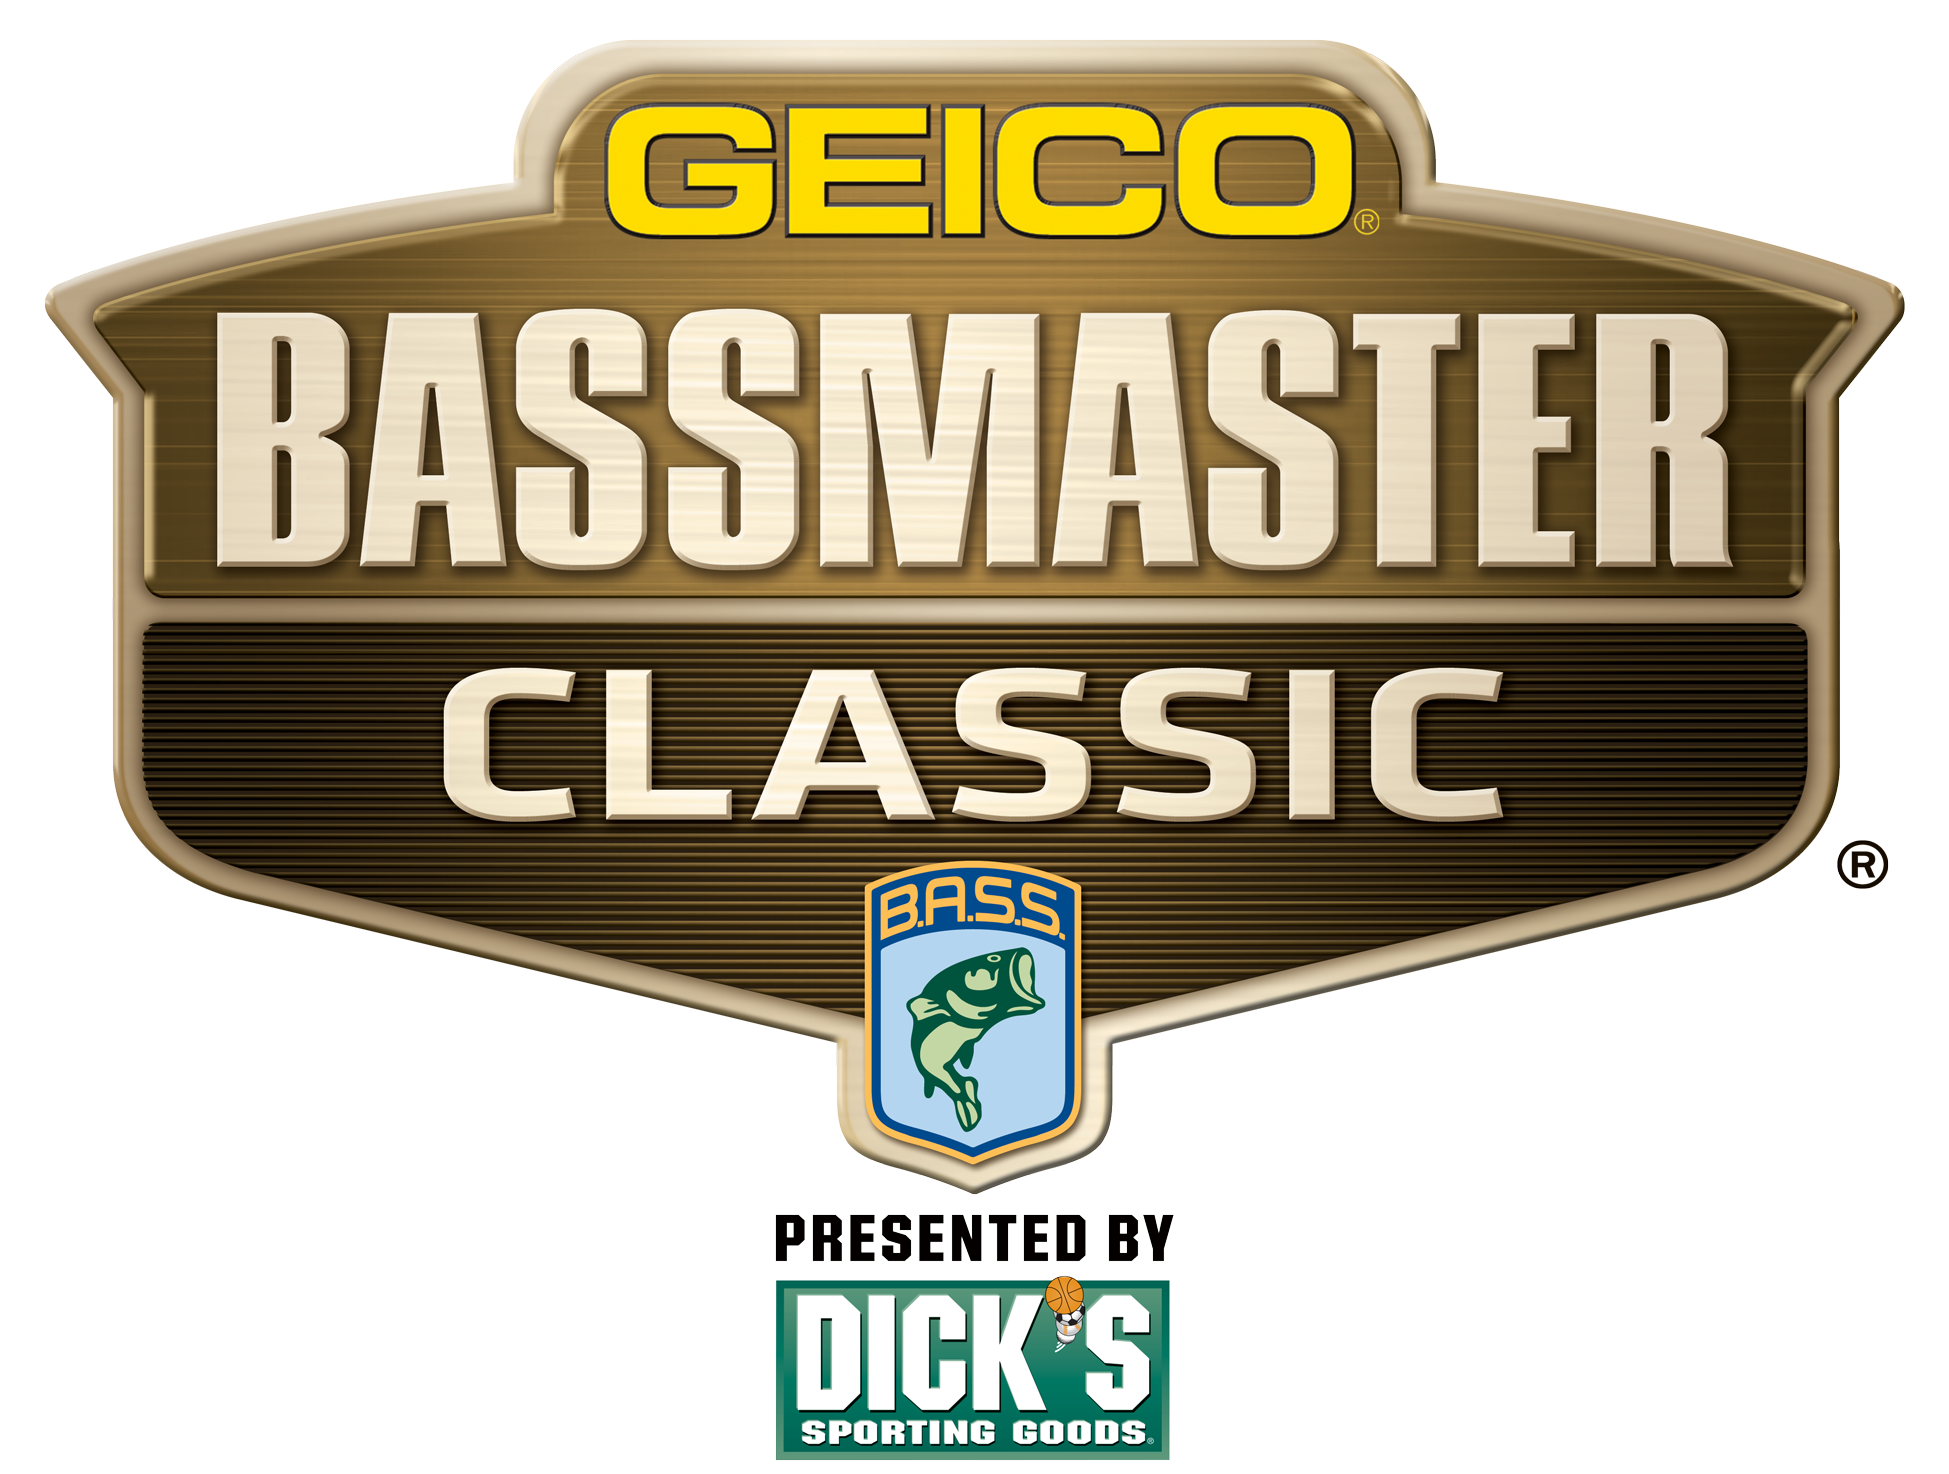 The 2018 GEICO Bassmaster Classic presented by DICKâS Sporting Goods will be in beautiful...